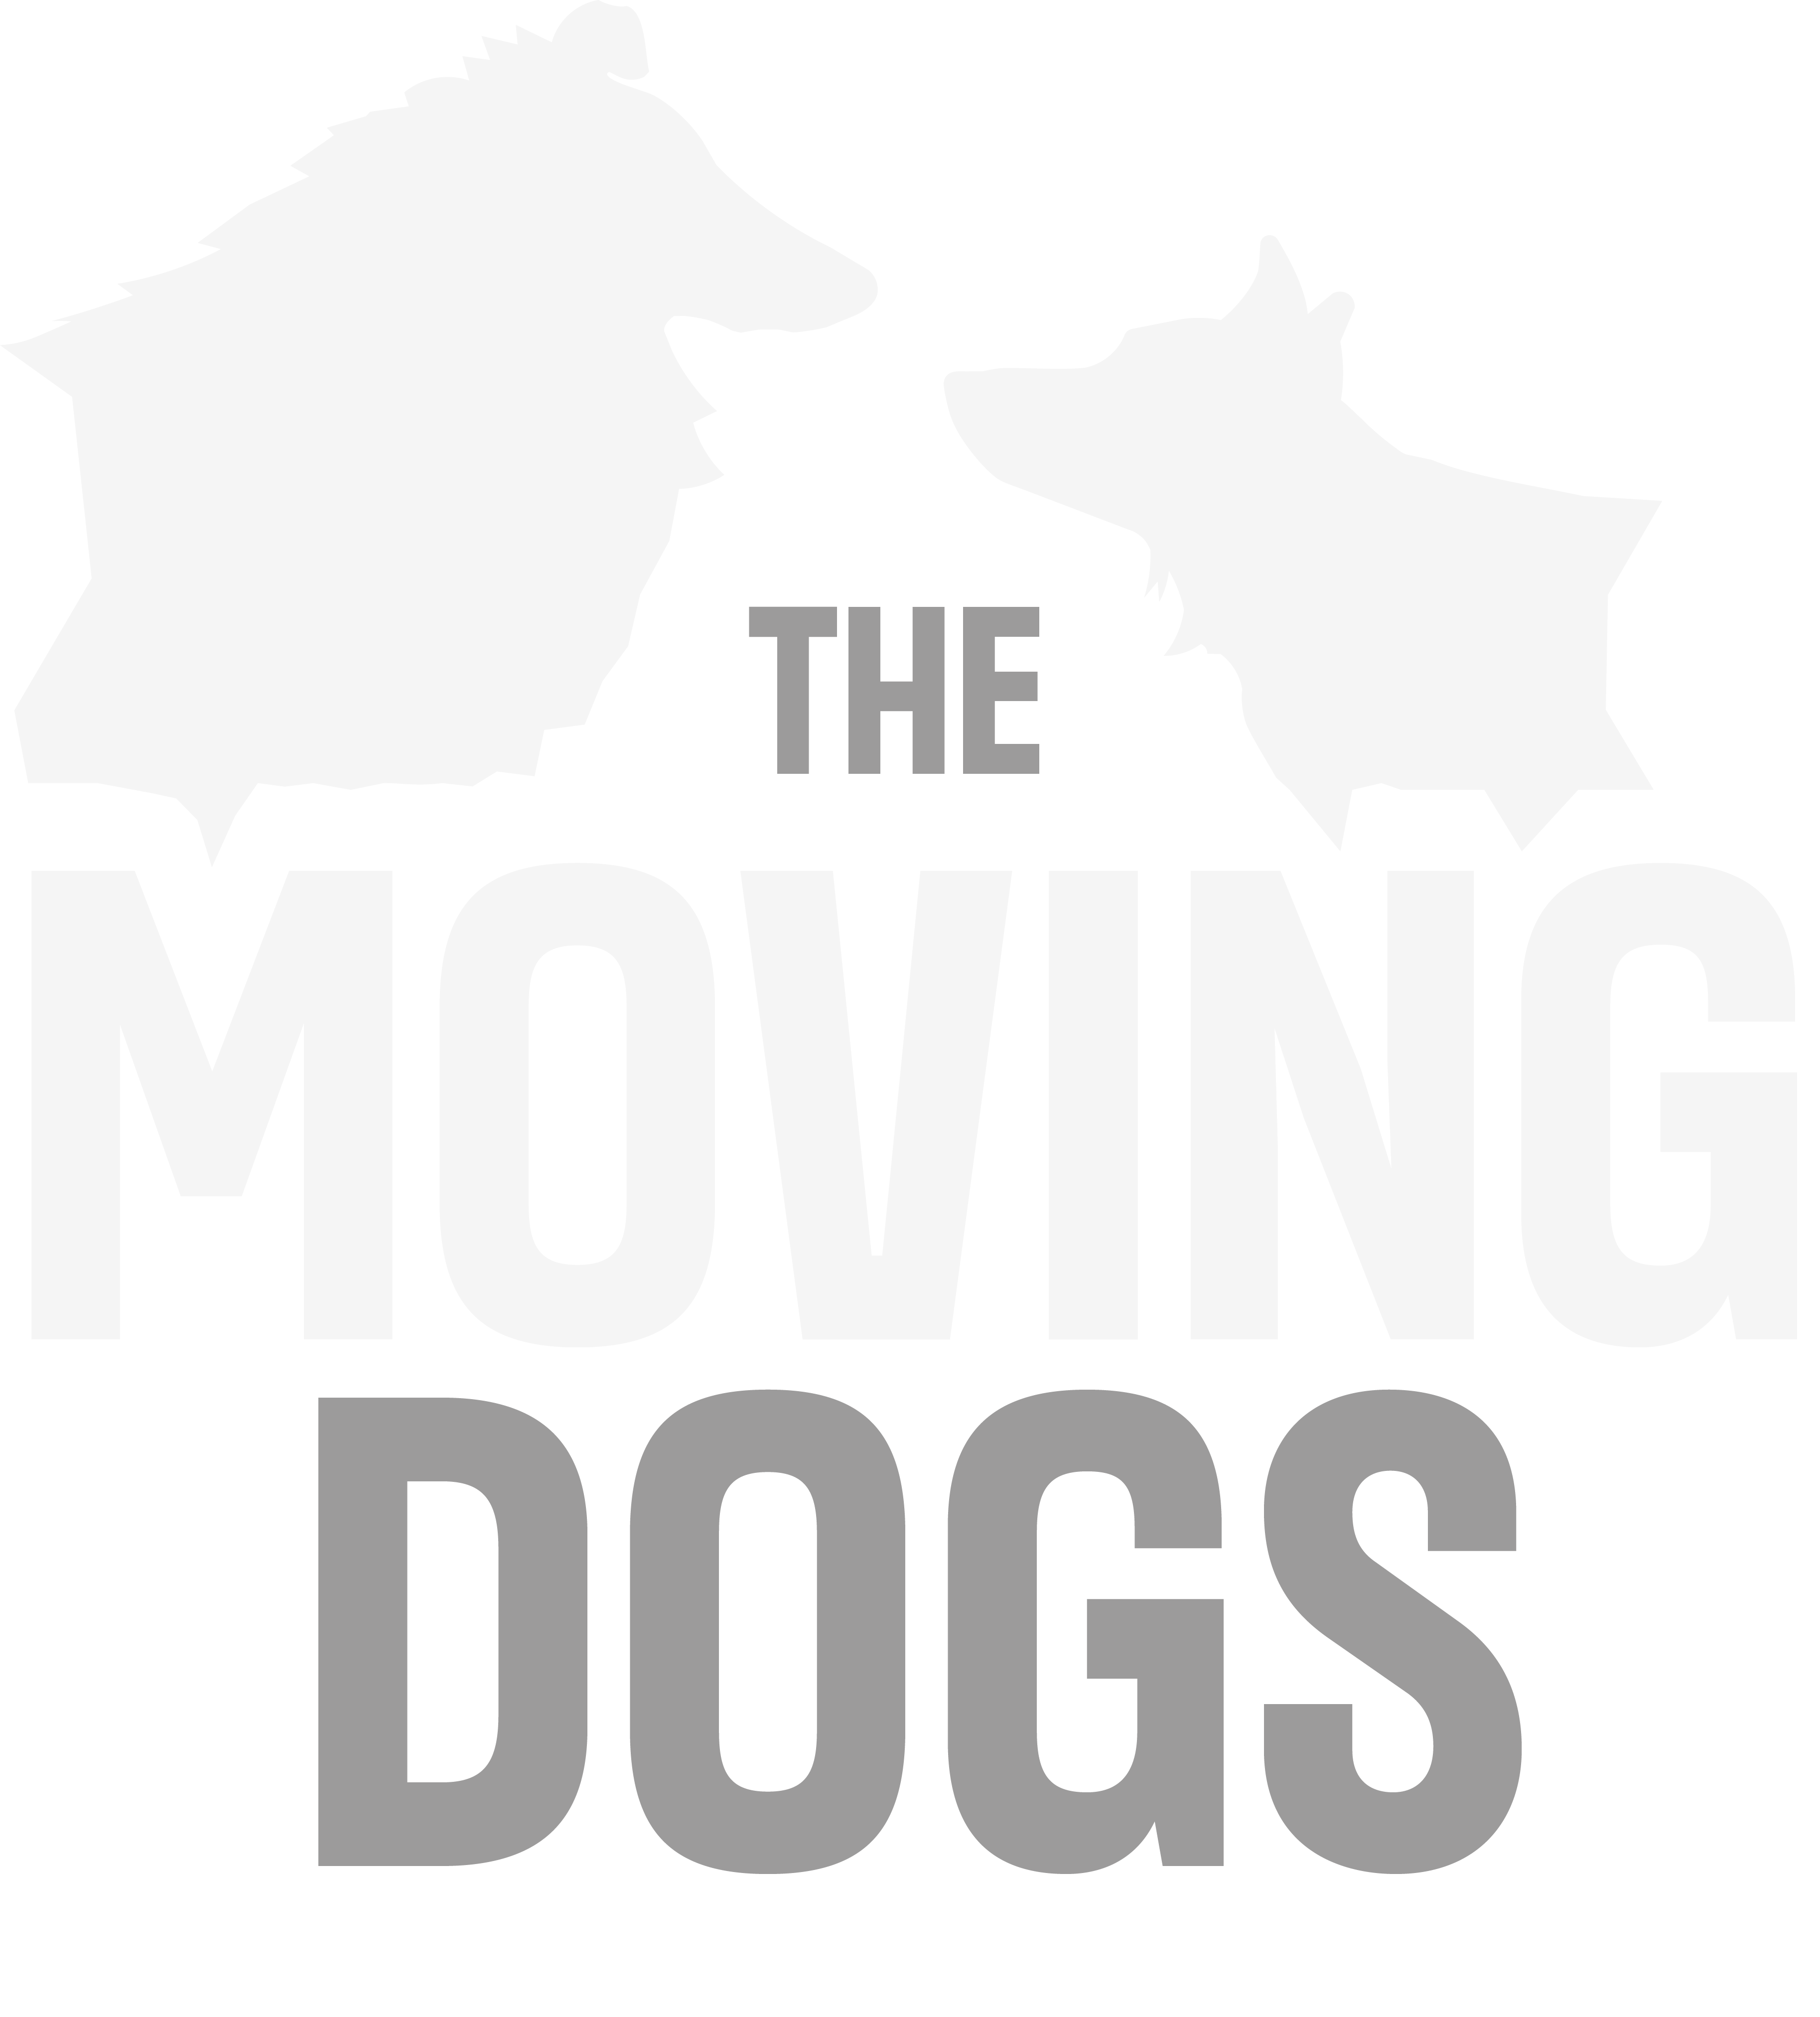 The Moving Dogs Logoogo